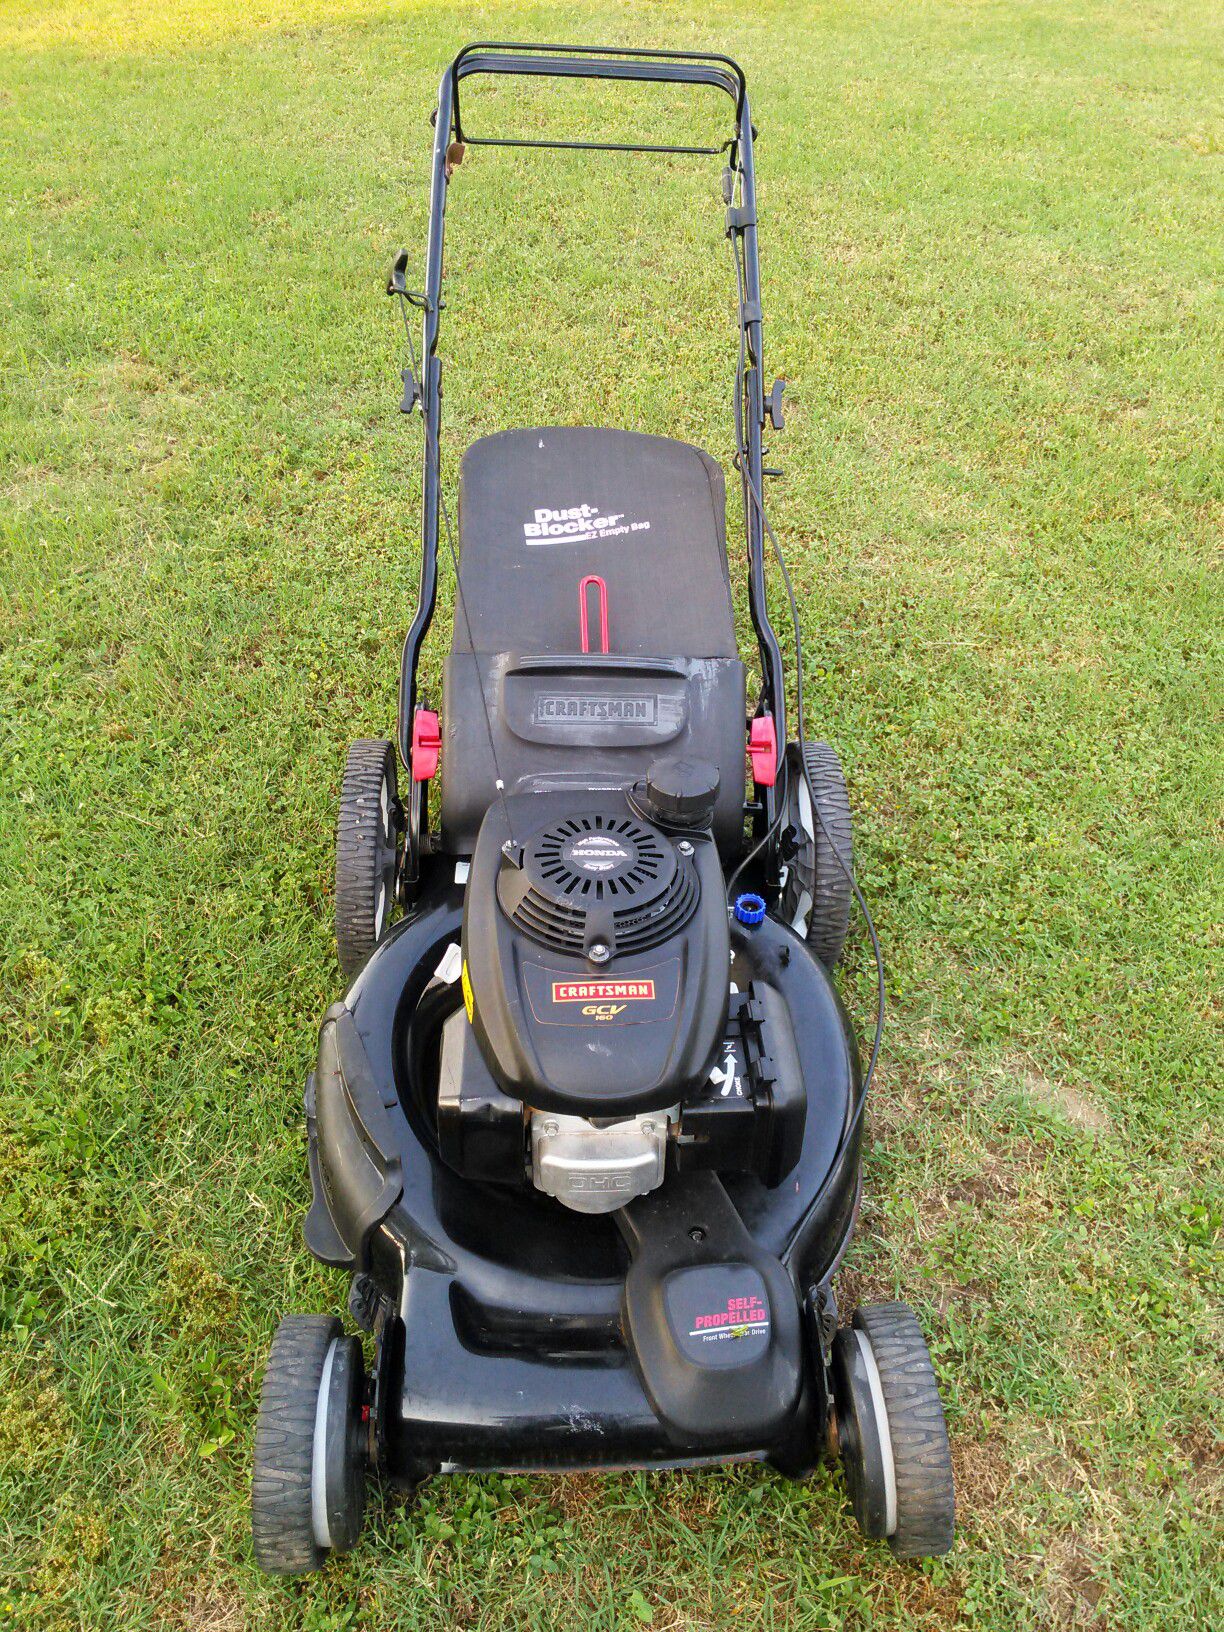 Very strong Craftsman 6.75 horsepower with Honda engine self-propelled lawn mower works absolutely great guaranteed to turn on on first pull